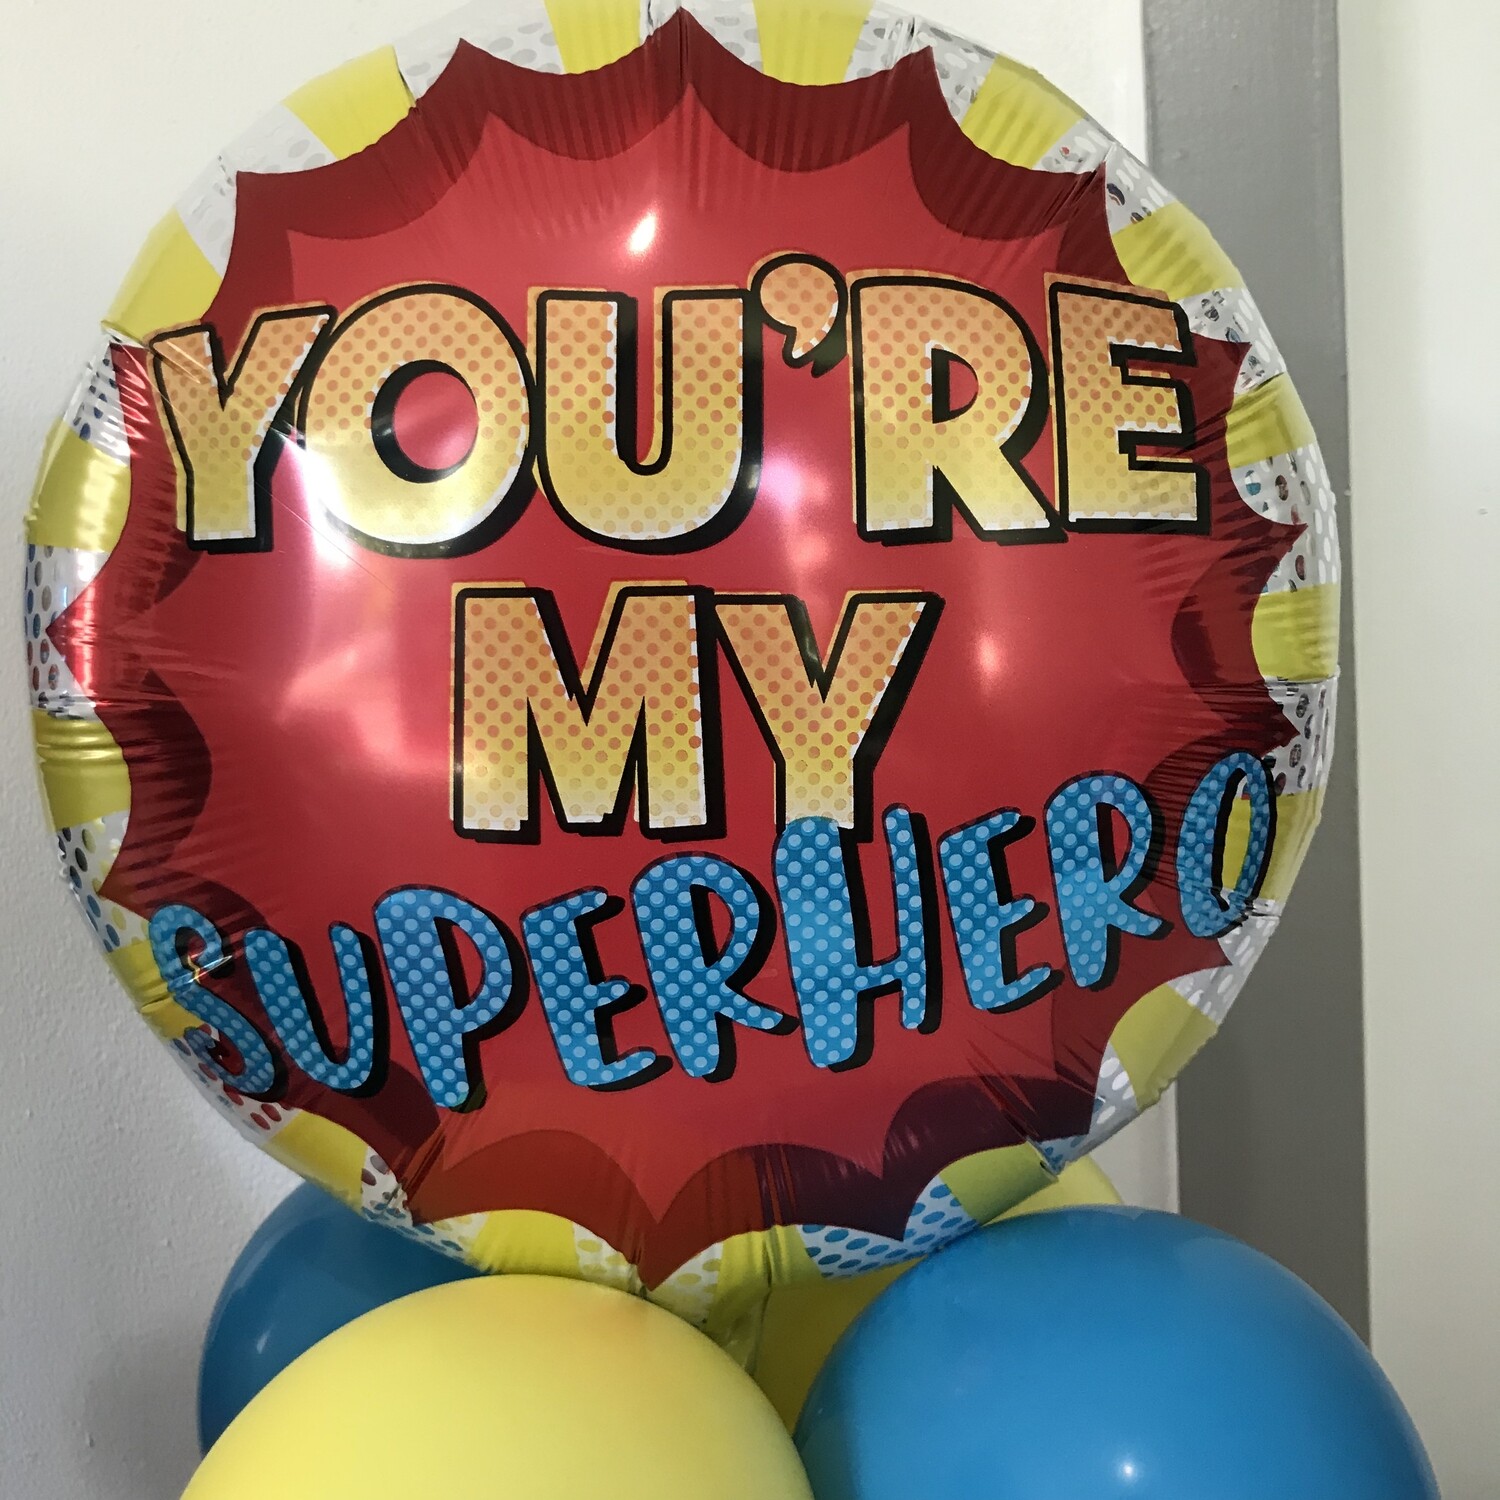 You're my superhero balloon bouquet (indoors) air filled